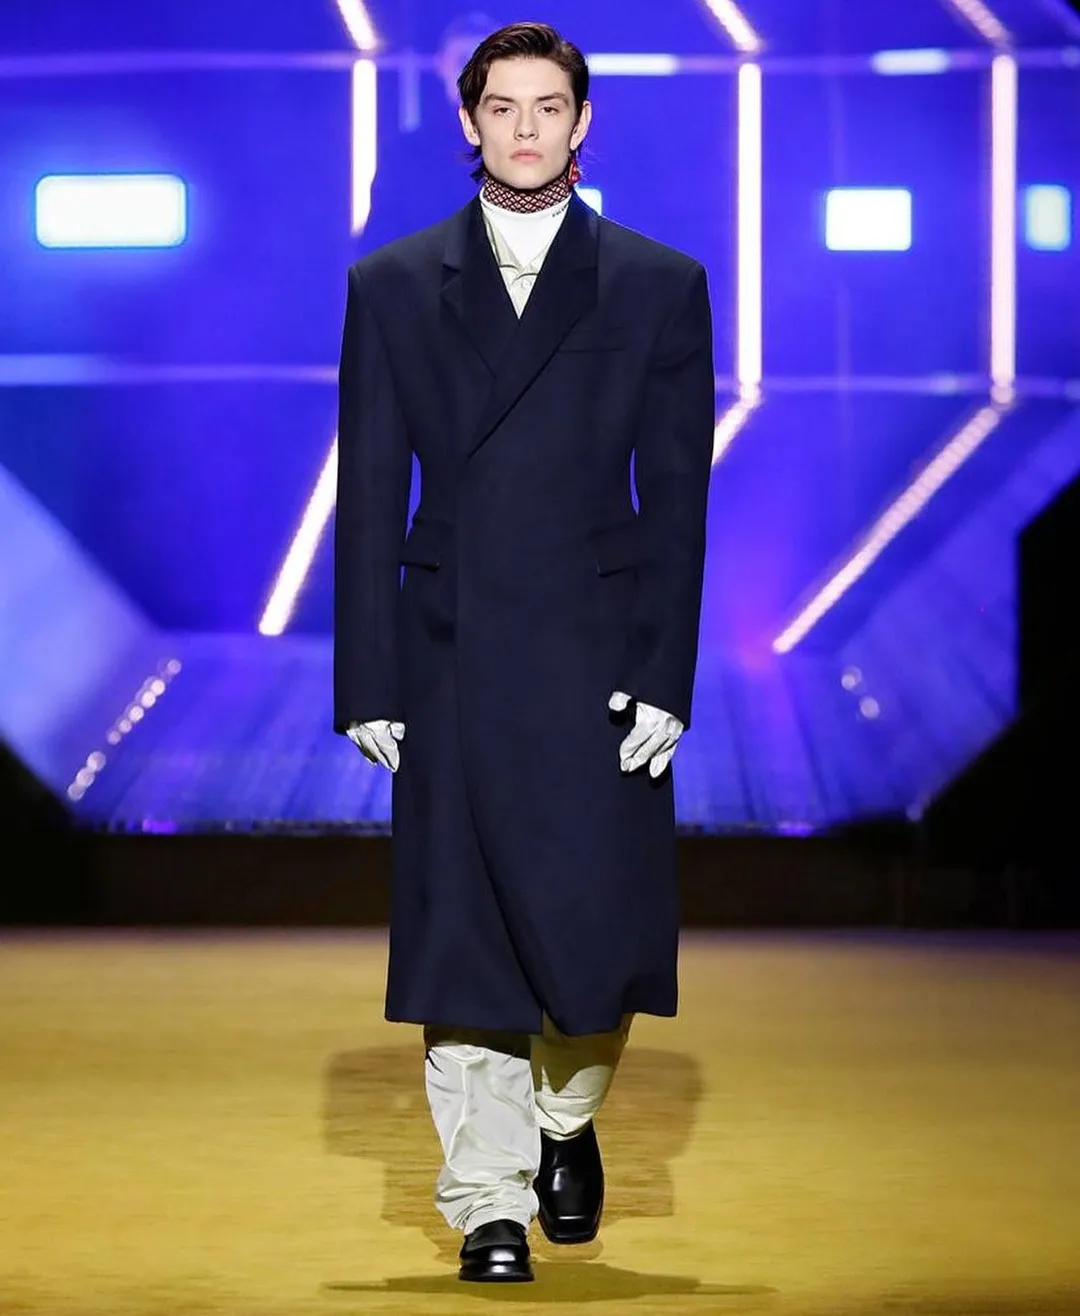 Louis Partridge standing tall at a Prada event in Milan, Italy